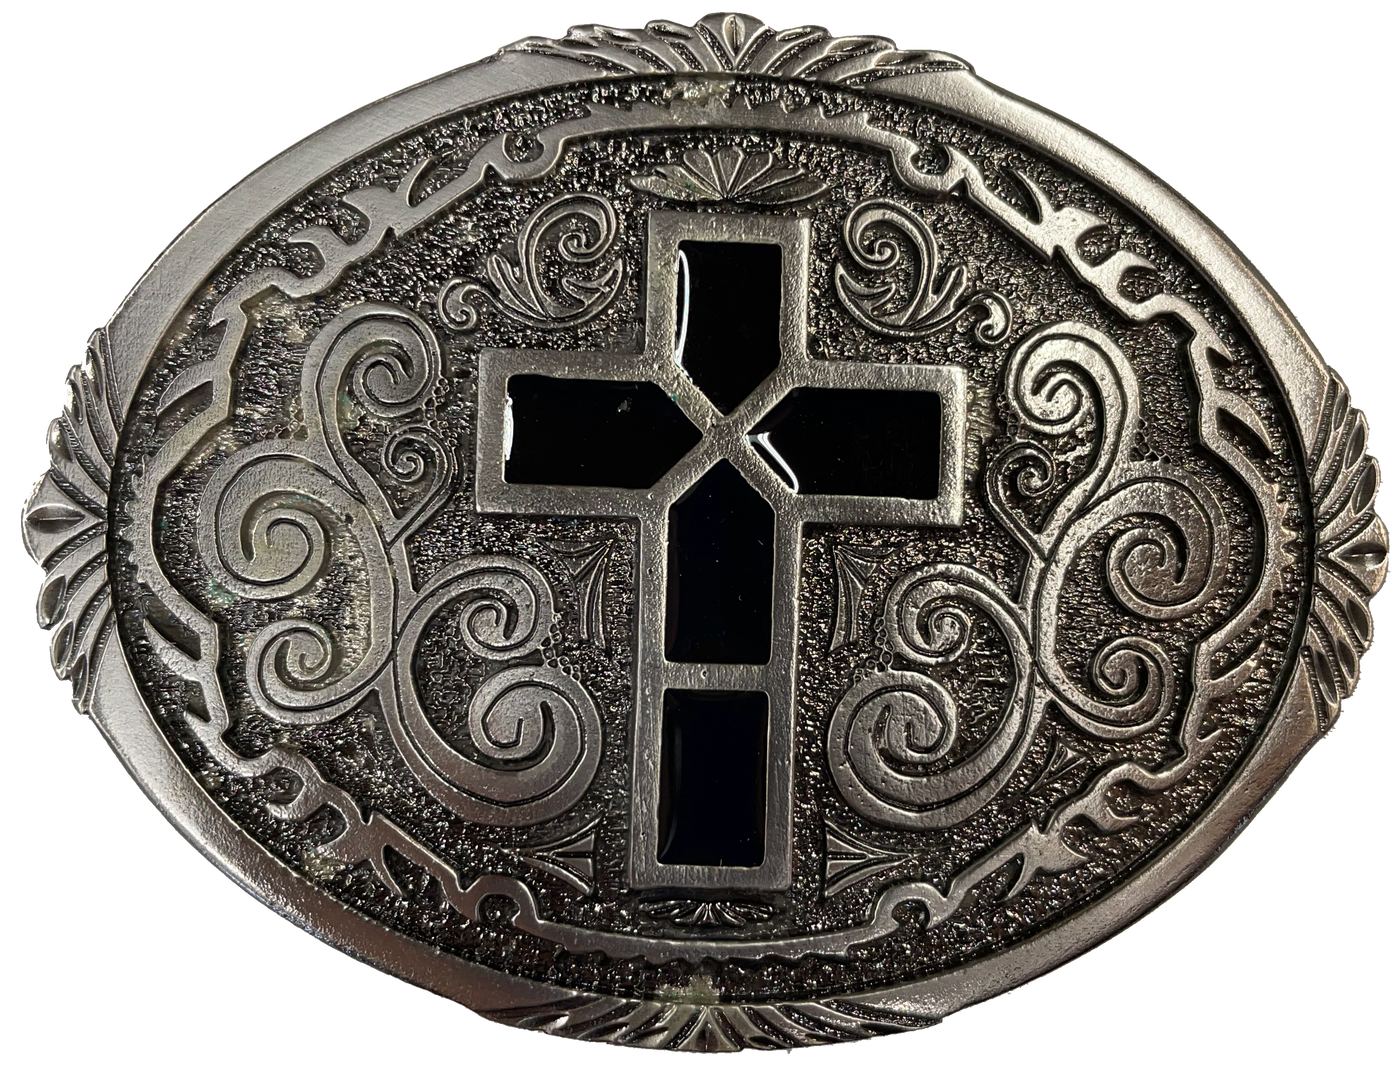 Pewter belt buckle that may be attached to your belt.  It has a western style oval shape with Black epoxy inlay cross in the center. Fits 1 1/2" belts, Size 3-1/2" x 2-3/4. Available in our shop just outside Nashville in Smyrna, TN.